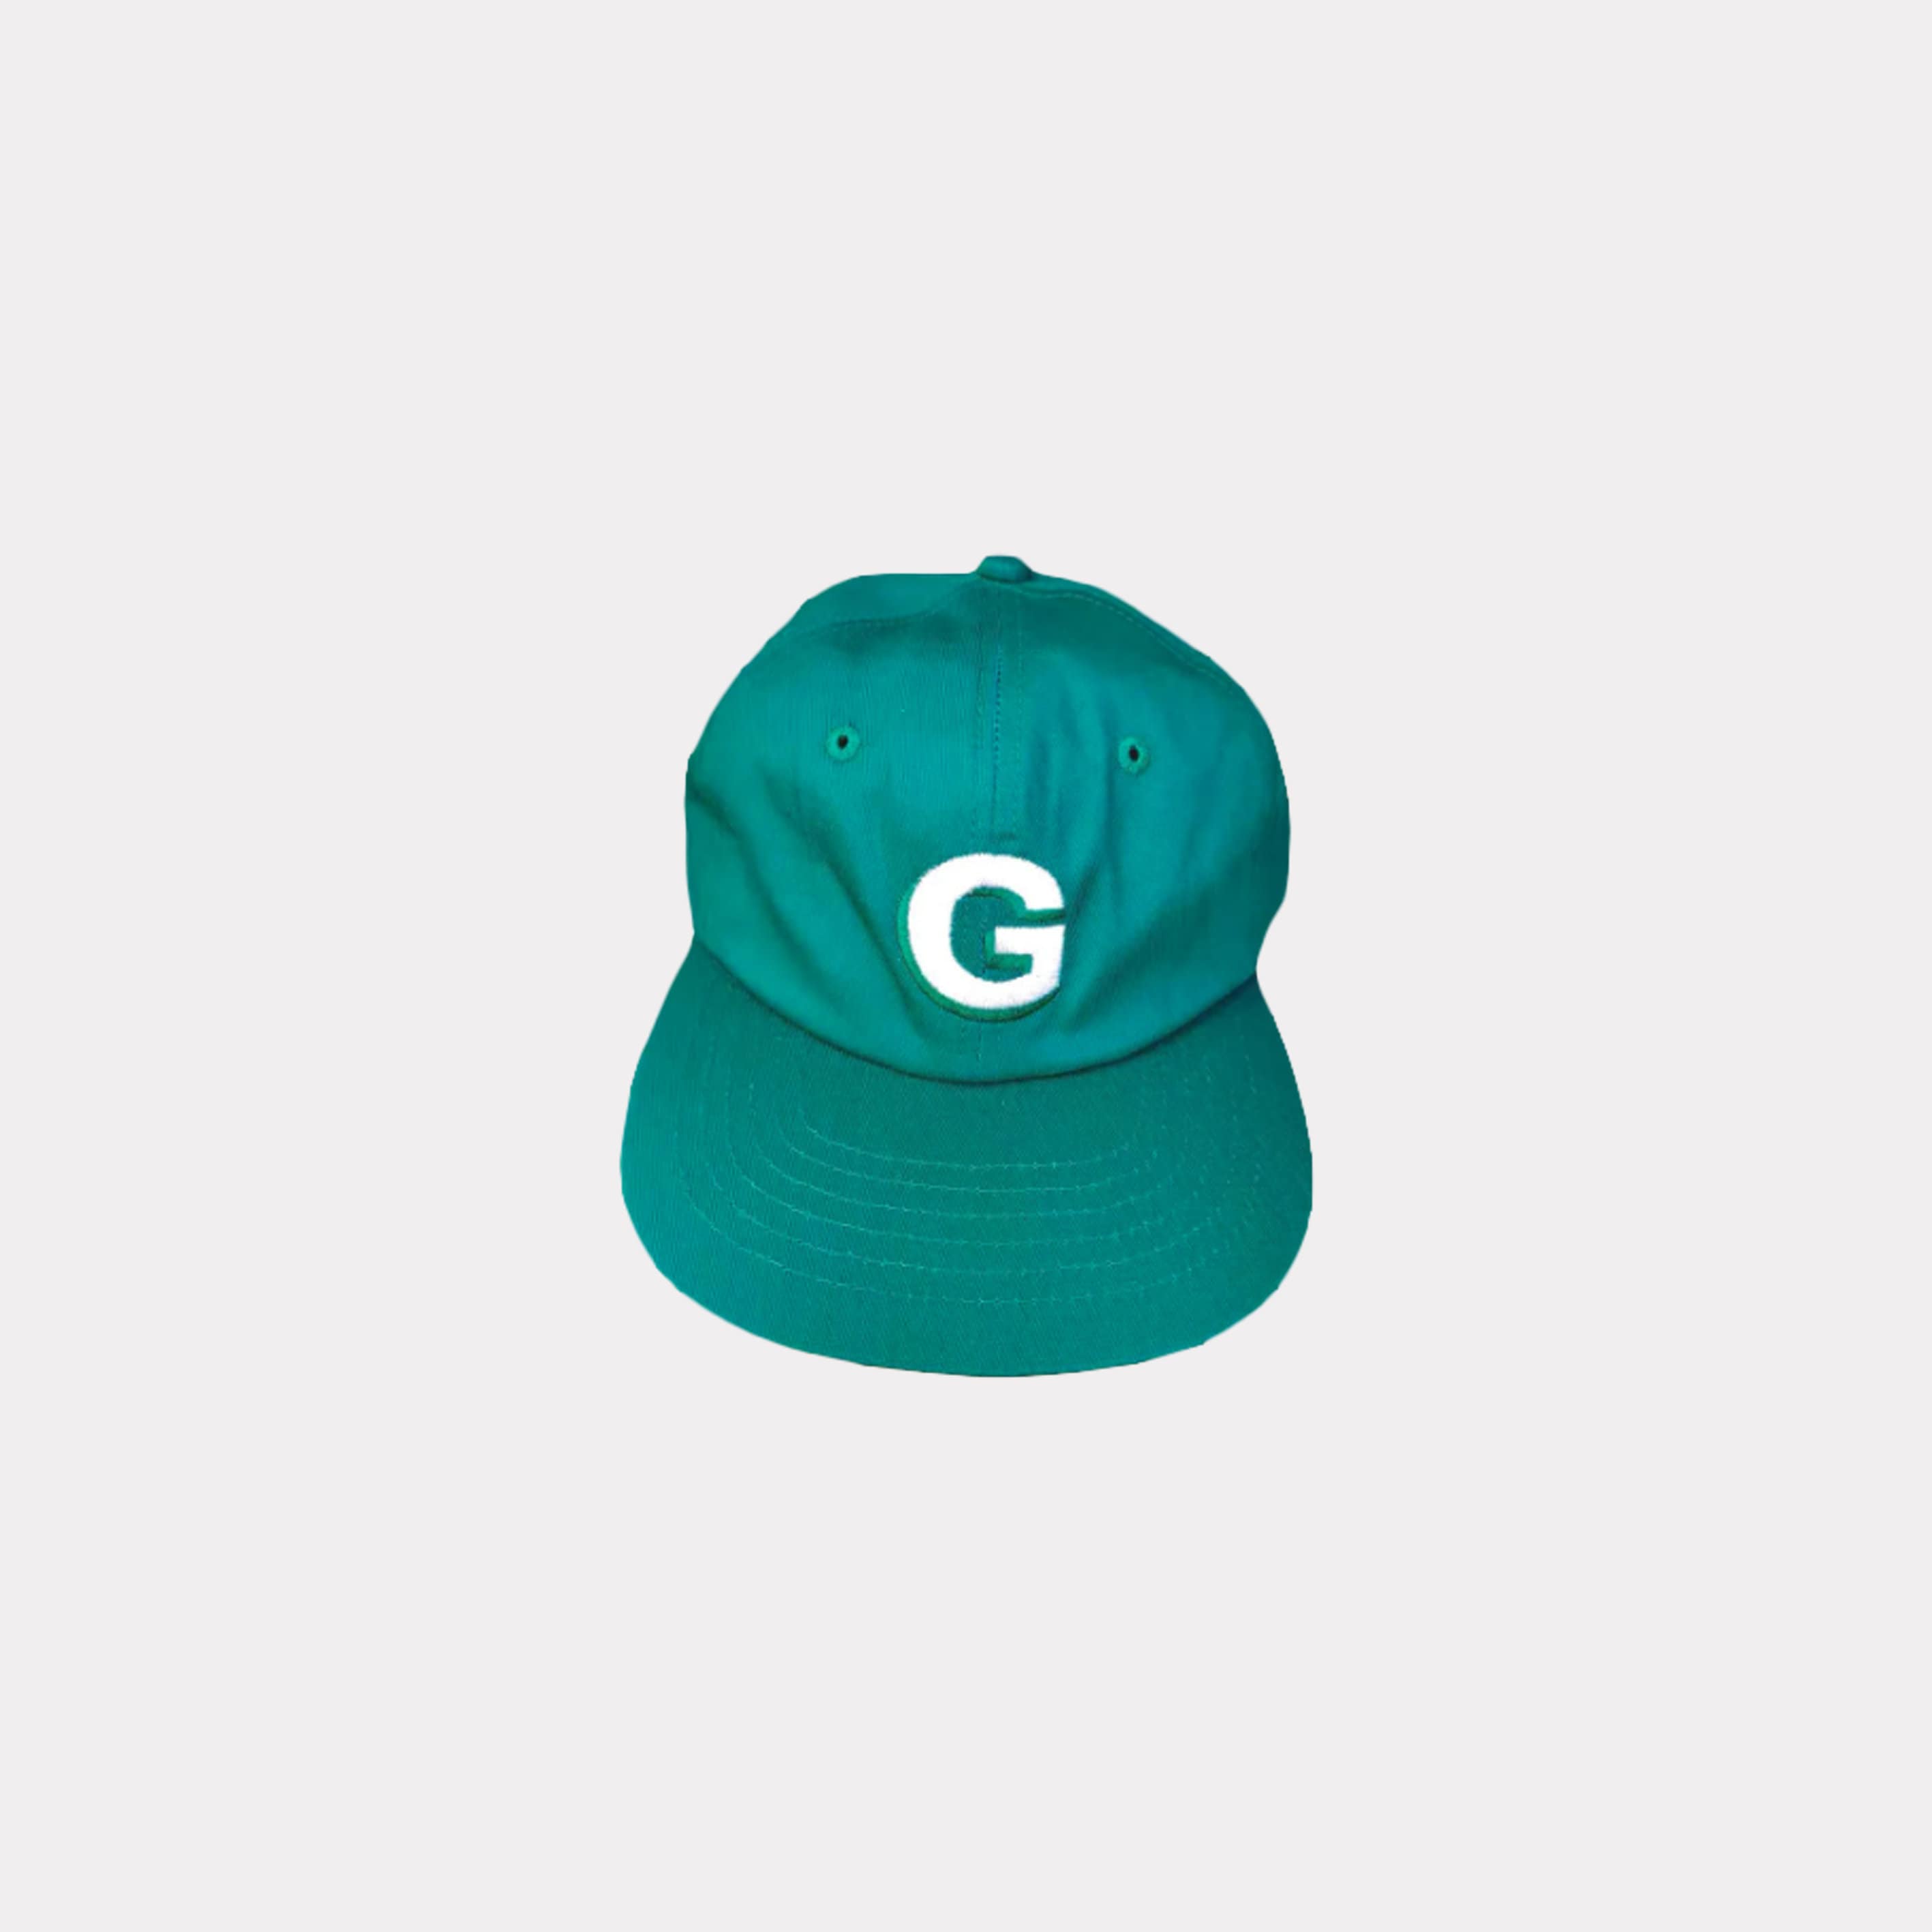 Flame Le Fleur golf Tyler The Creator New Mens Womens Hat Snapback  embroidery Cap casquette baseball hats #588 - AliExpress